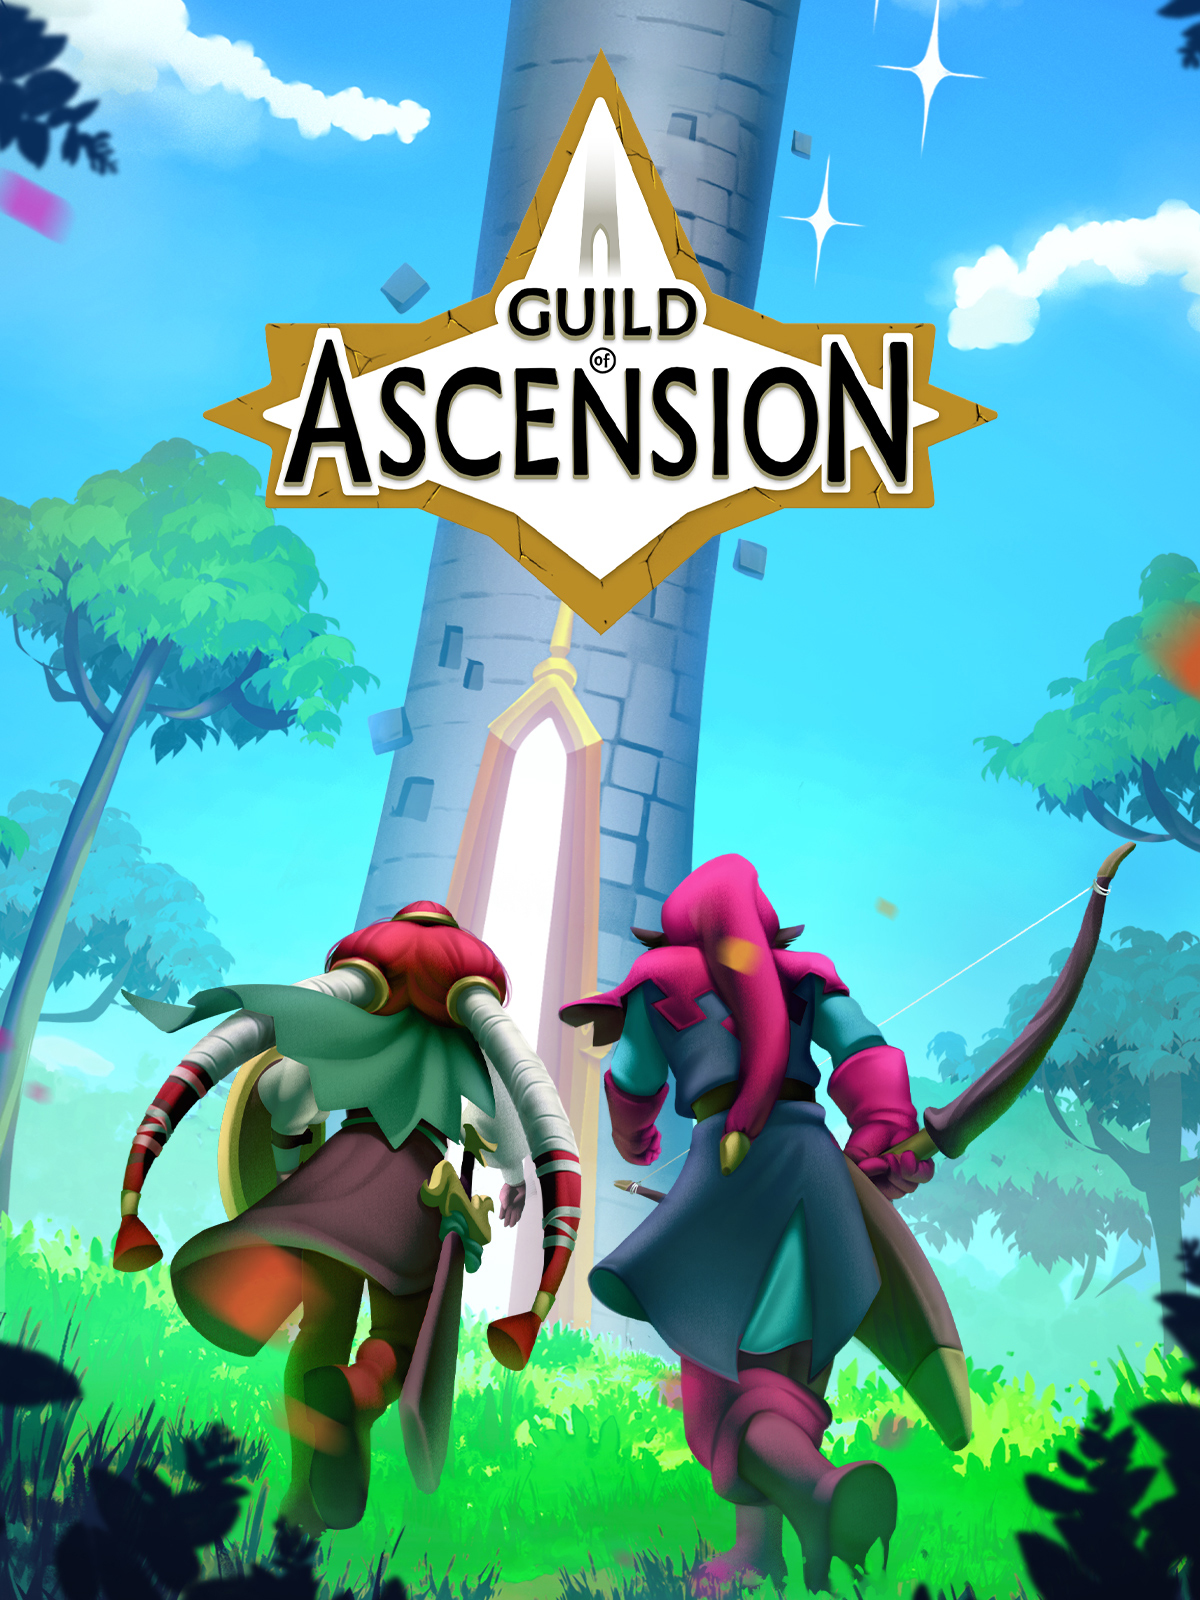 Guild of Ascension [PC, Цифровая версия] (Цифровая версия) цена и фото